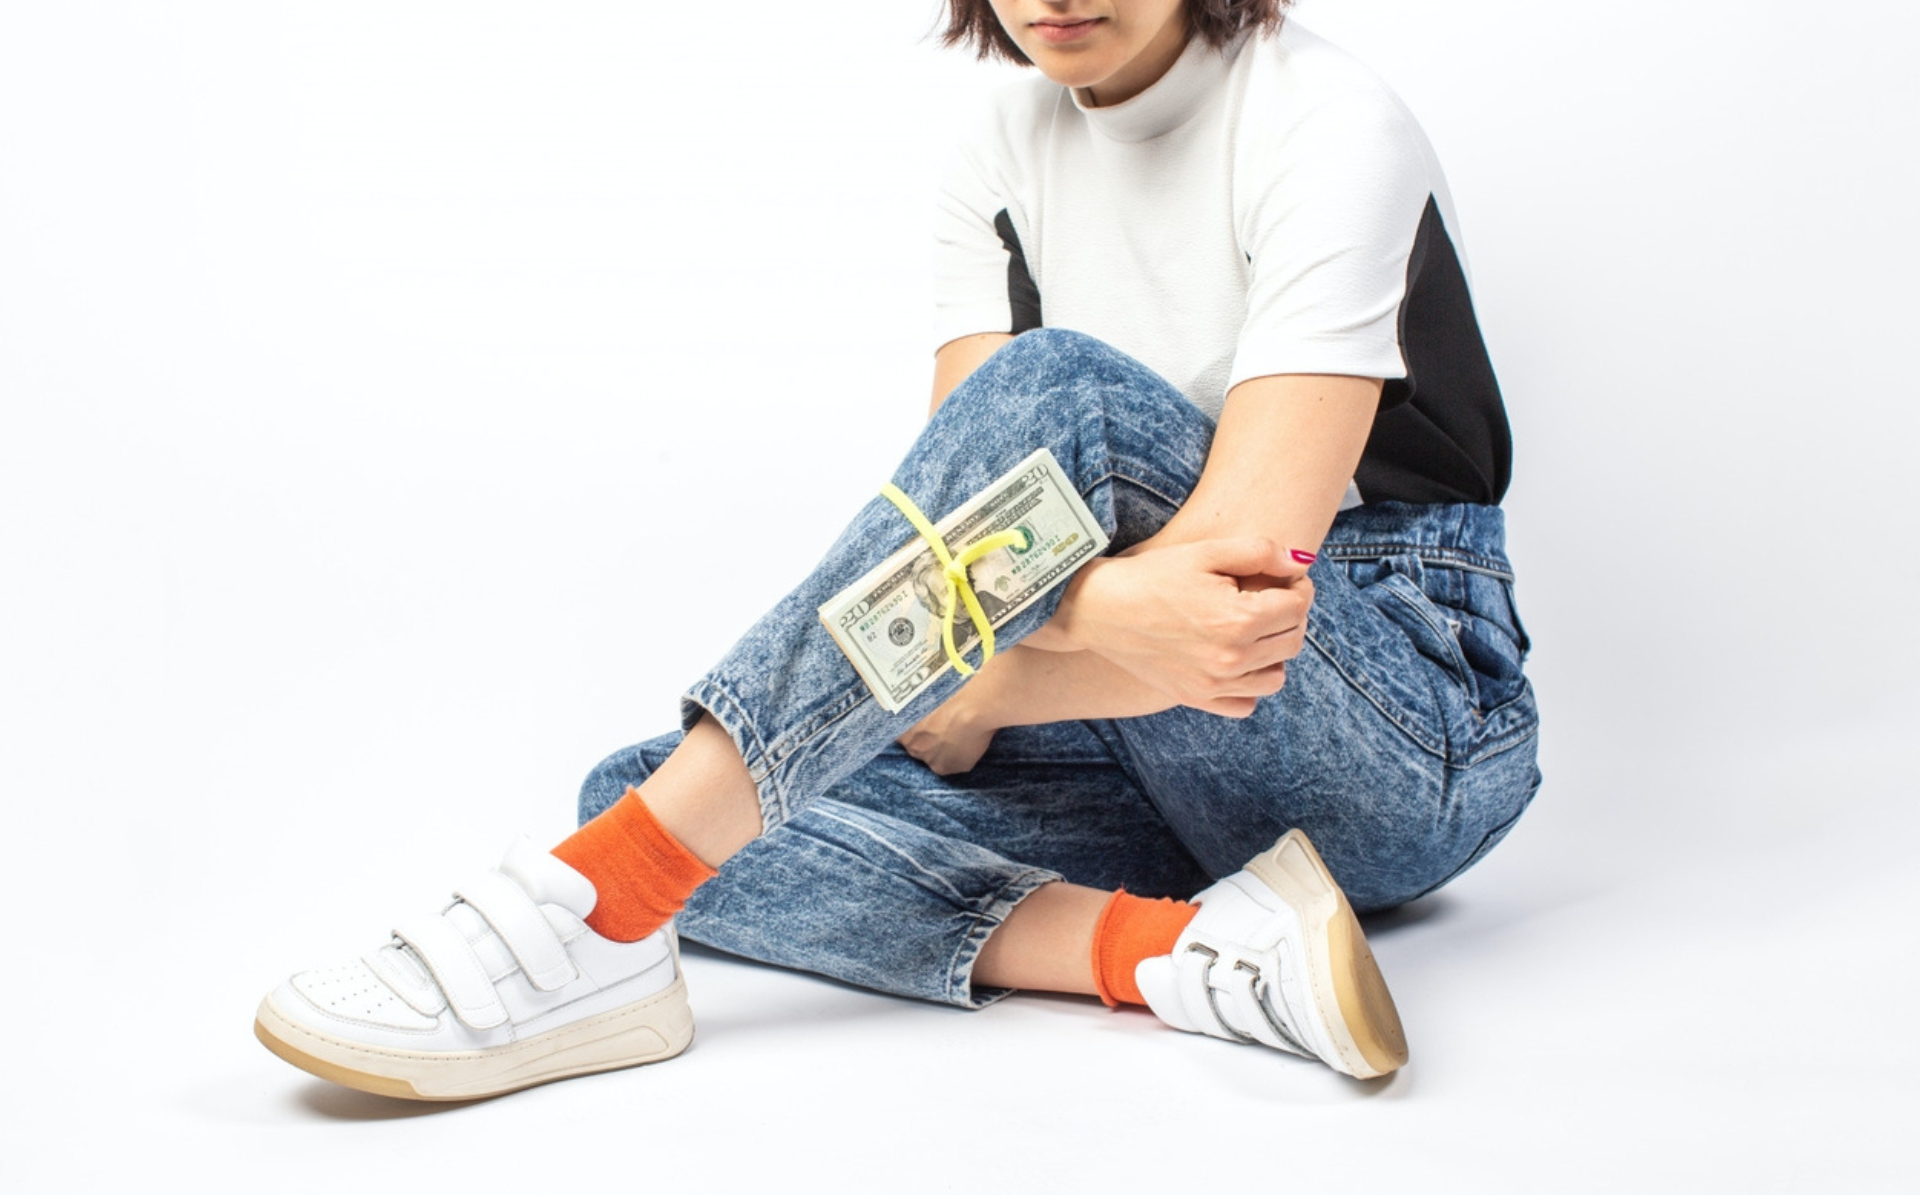 This is a photo of a girl sitting on the floor, with one foot out and a stack of money tied to her leg. She is wearing denim pants, a white and black shirt, has orange socks and white sneakers. Her face is cut off in the picture, but she has a short bob and you can see her lips.